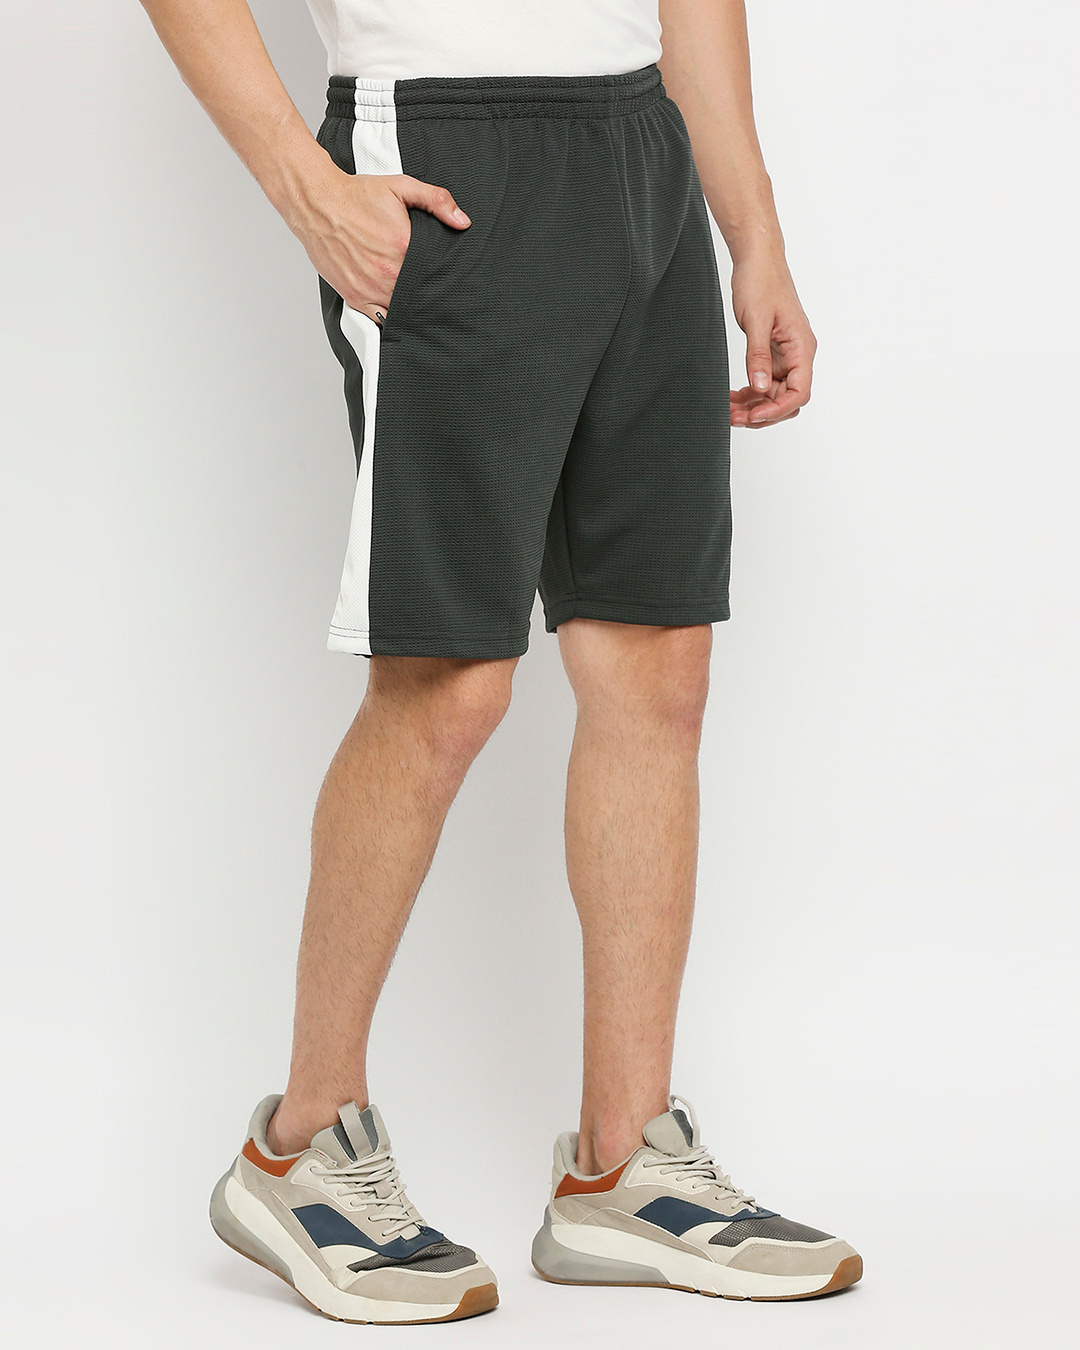 Shop Men's Grey Shorts with White Side Panel-Back